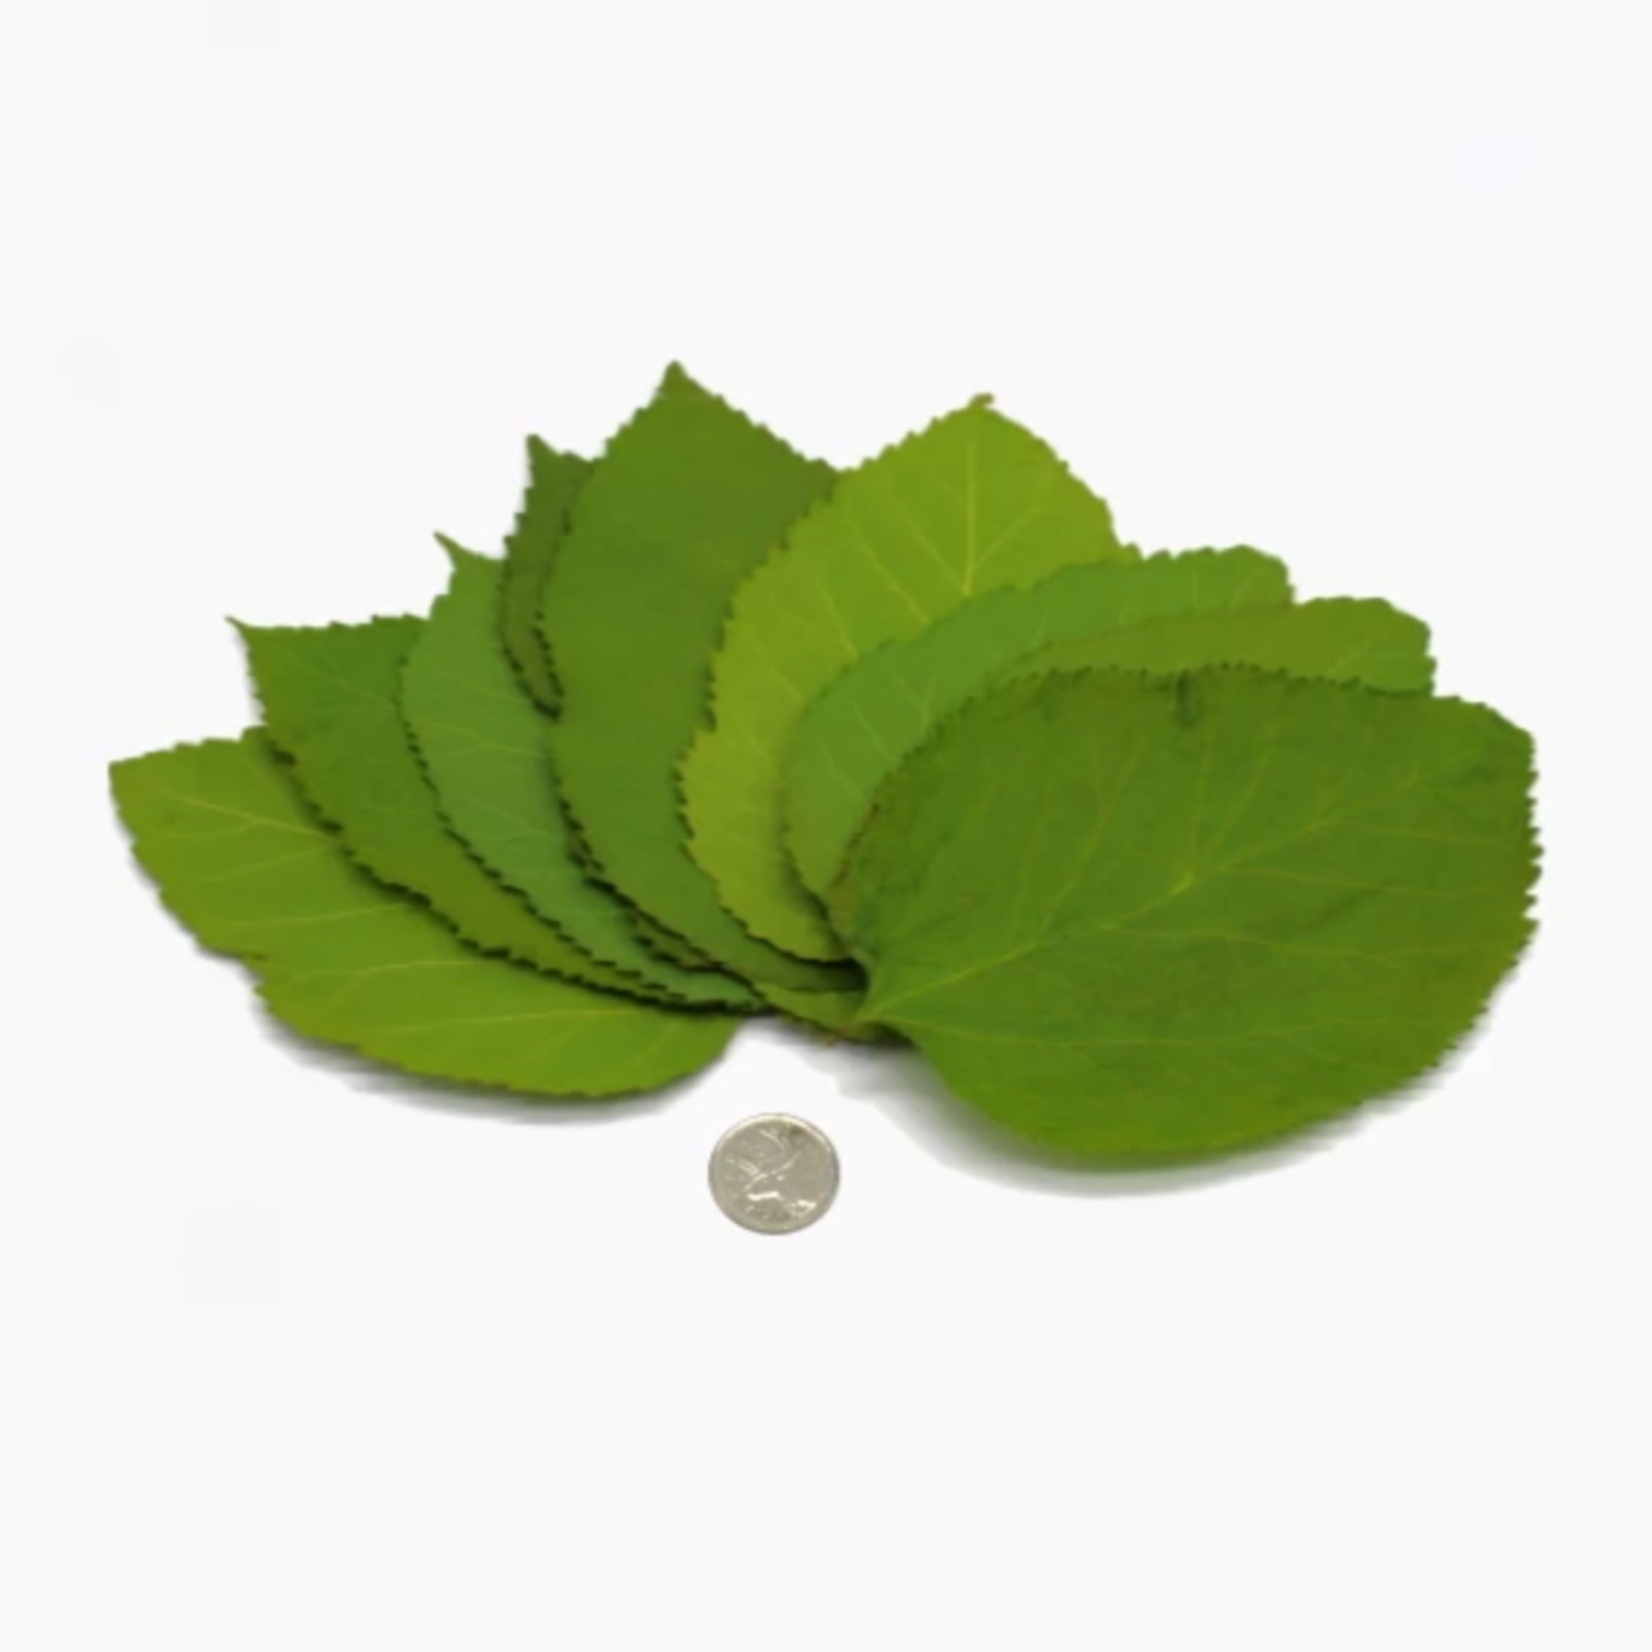 NewCal Pet Mulberry Leaves (10 pack)